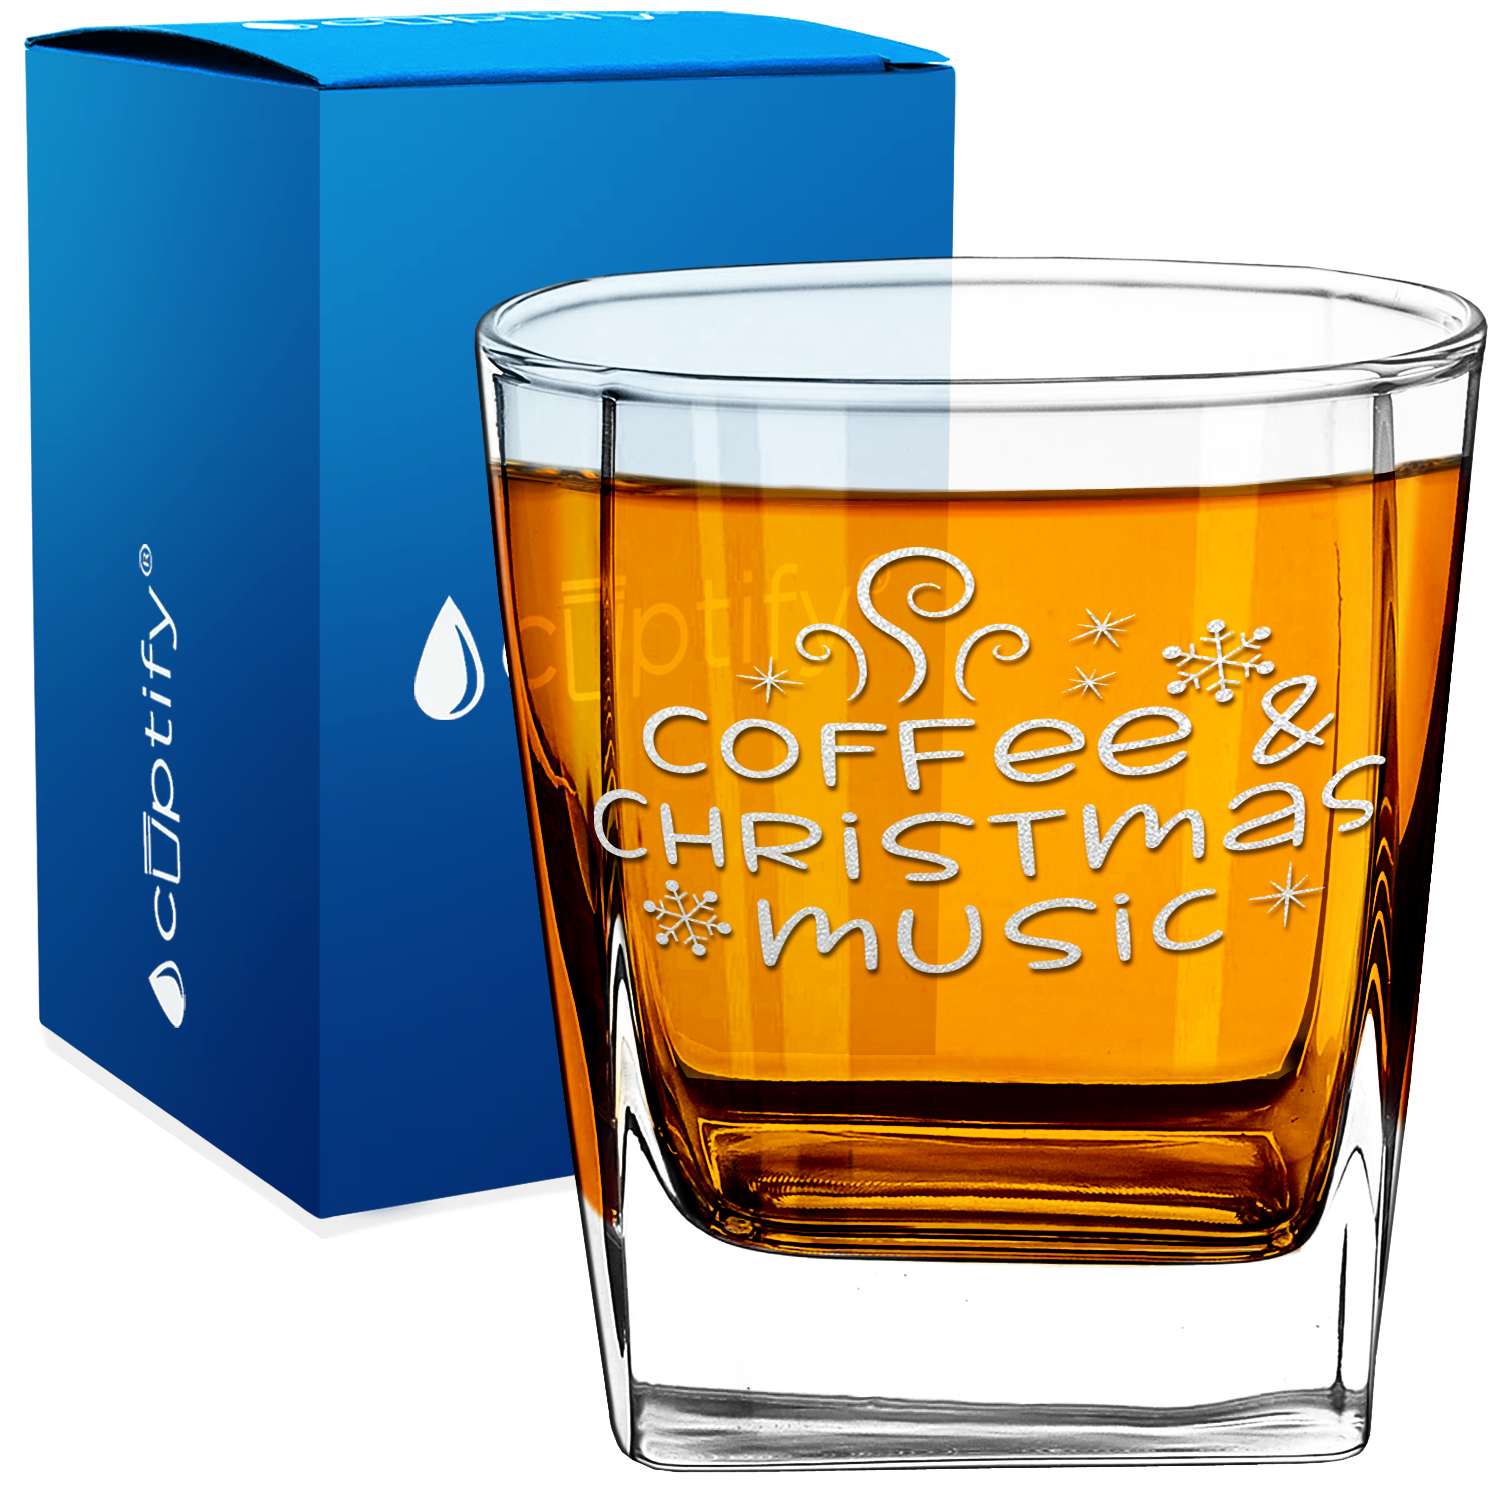 Coffee and Christmas Music 12oz Double Old Fashioned Glass